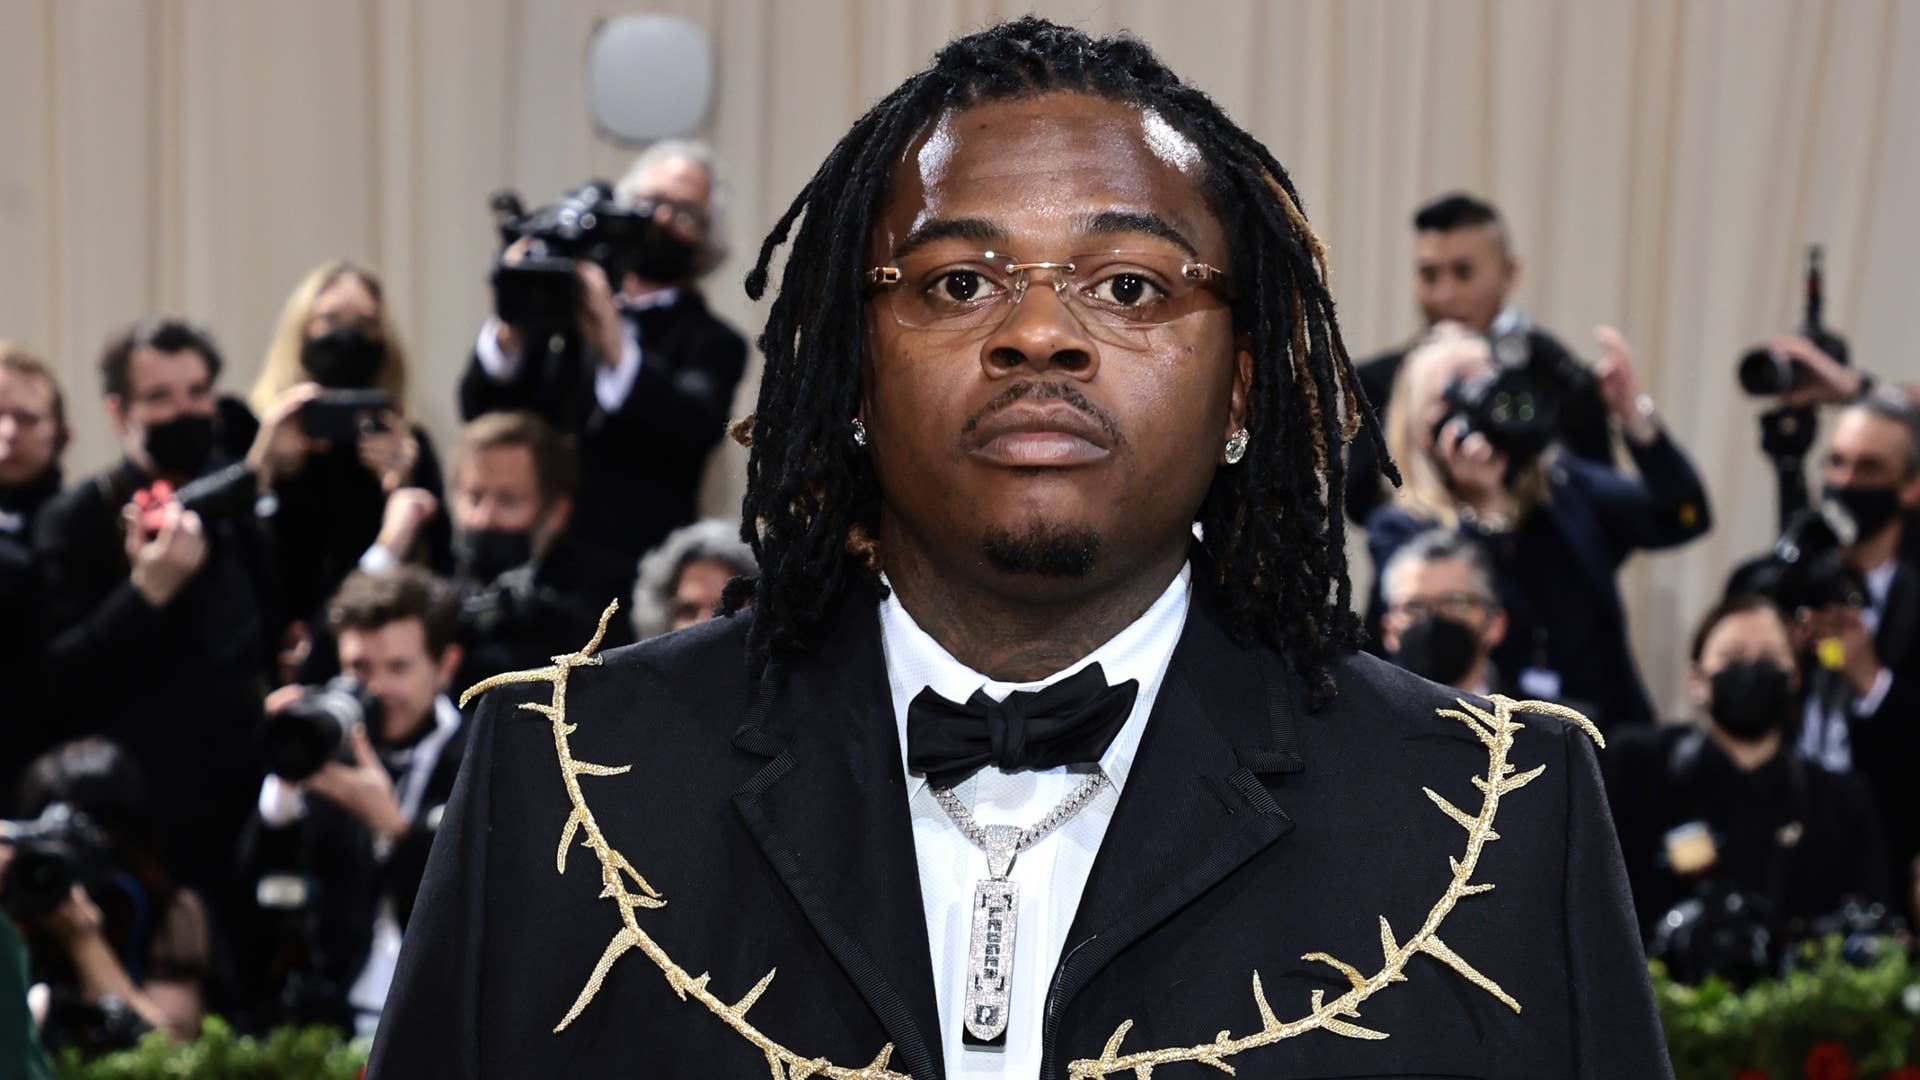 Gunna is seen on the red carpet